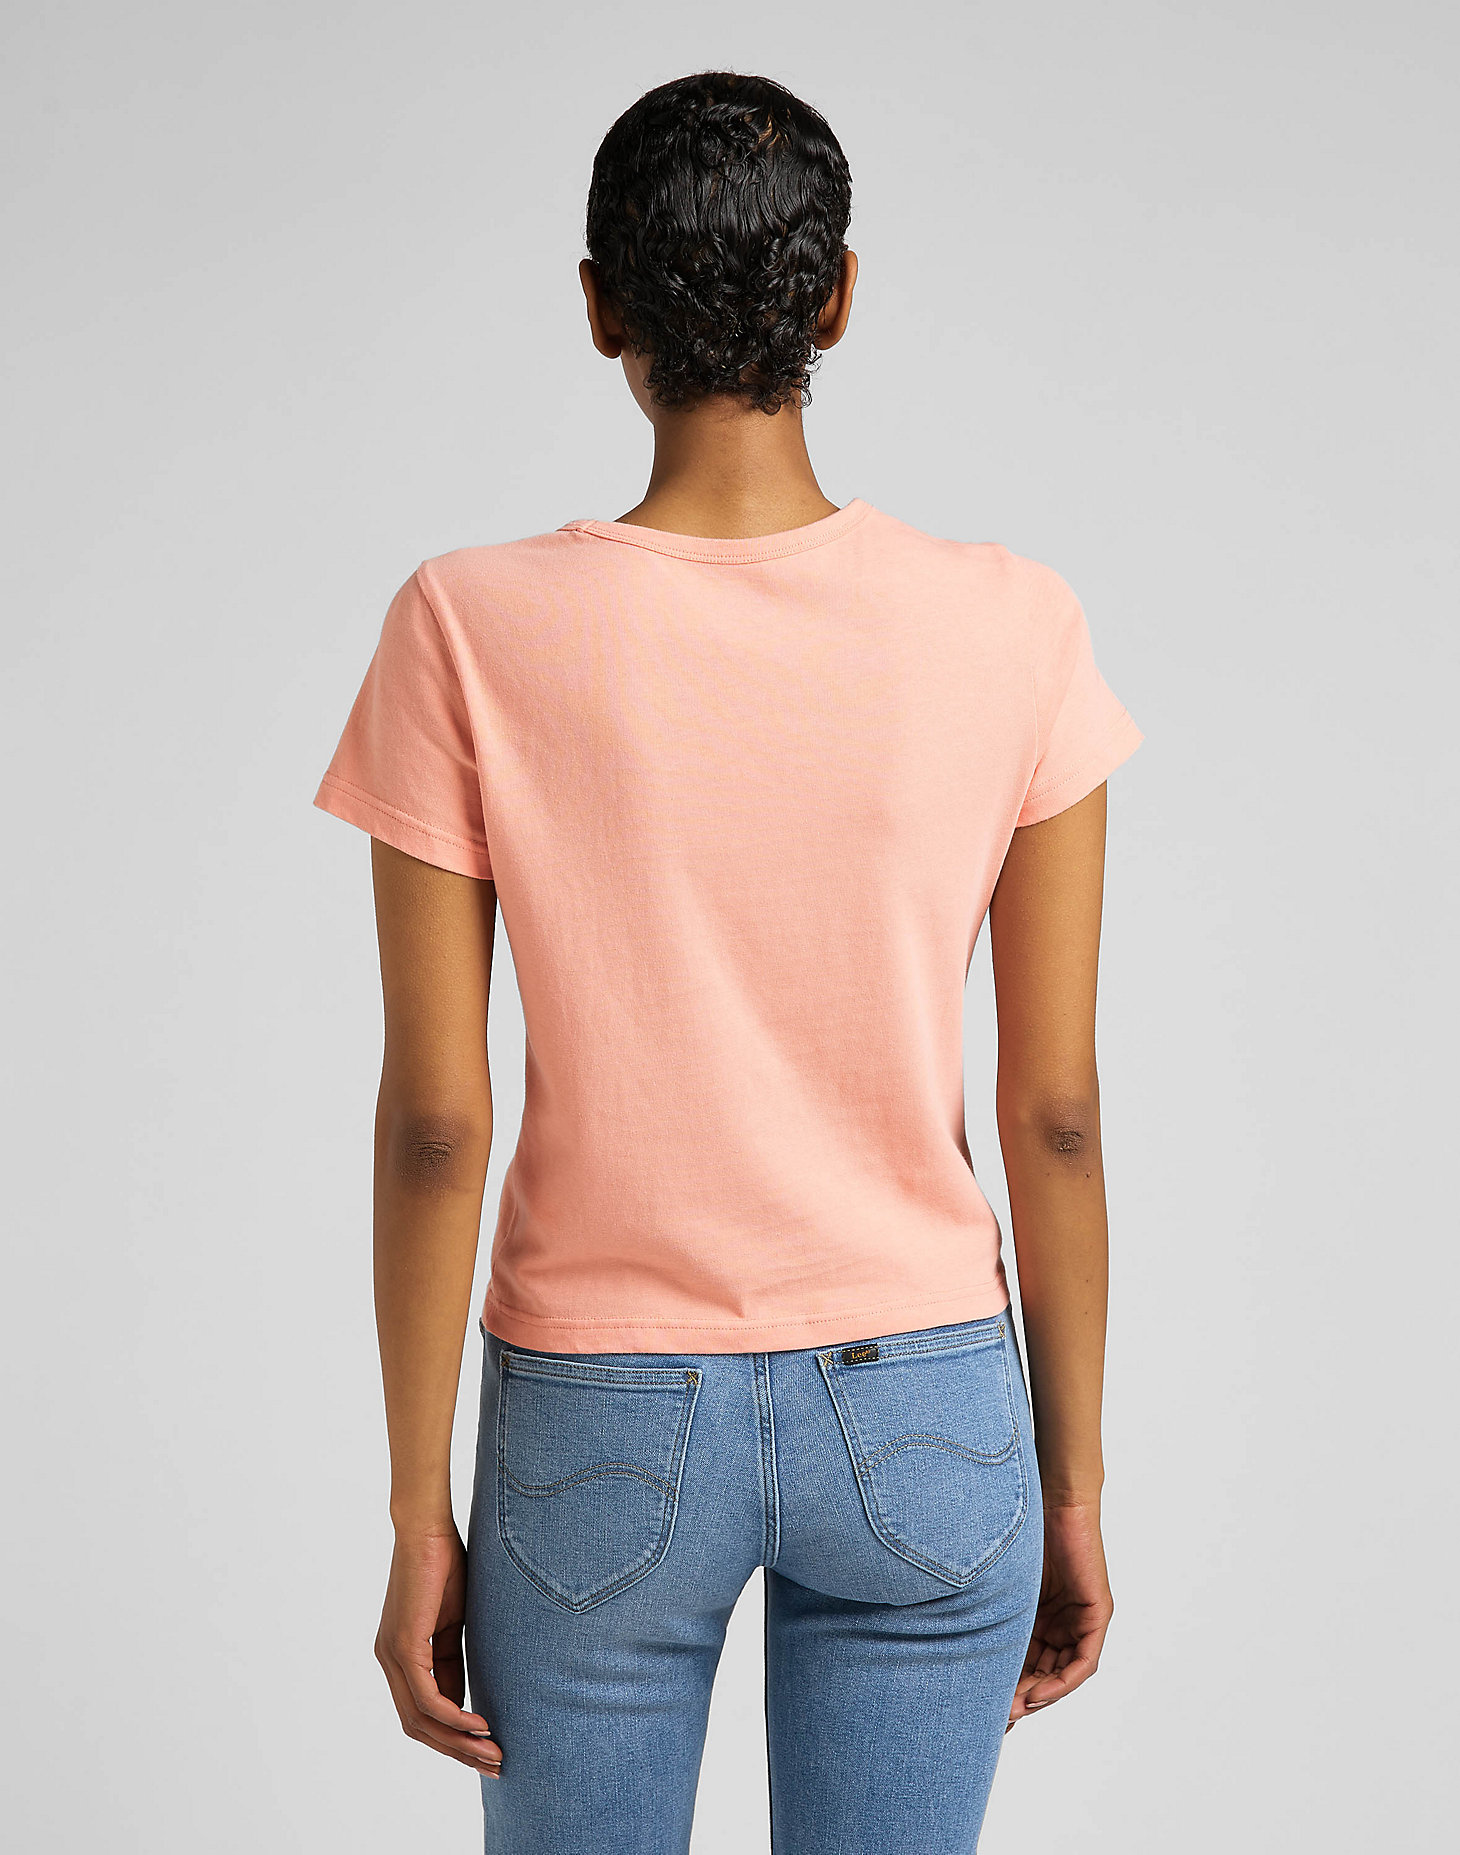 Slim Cropped Tee in Bright Coral alternative view 1